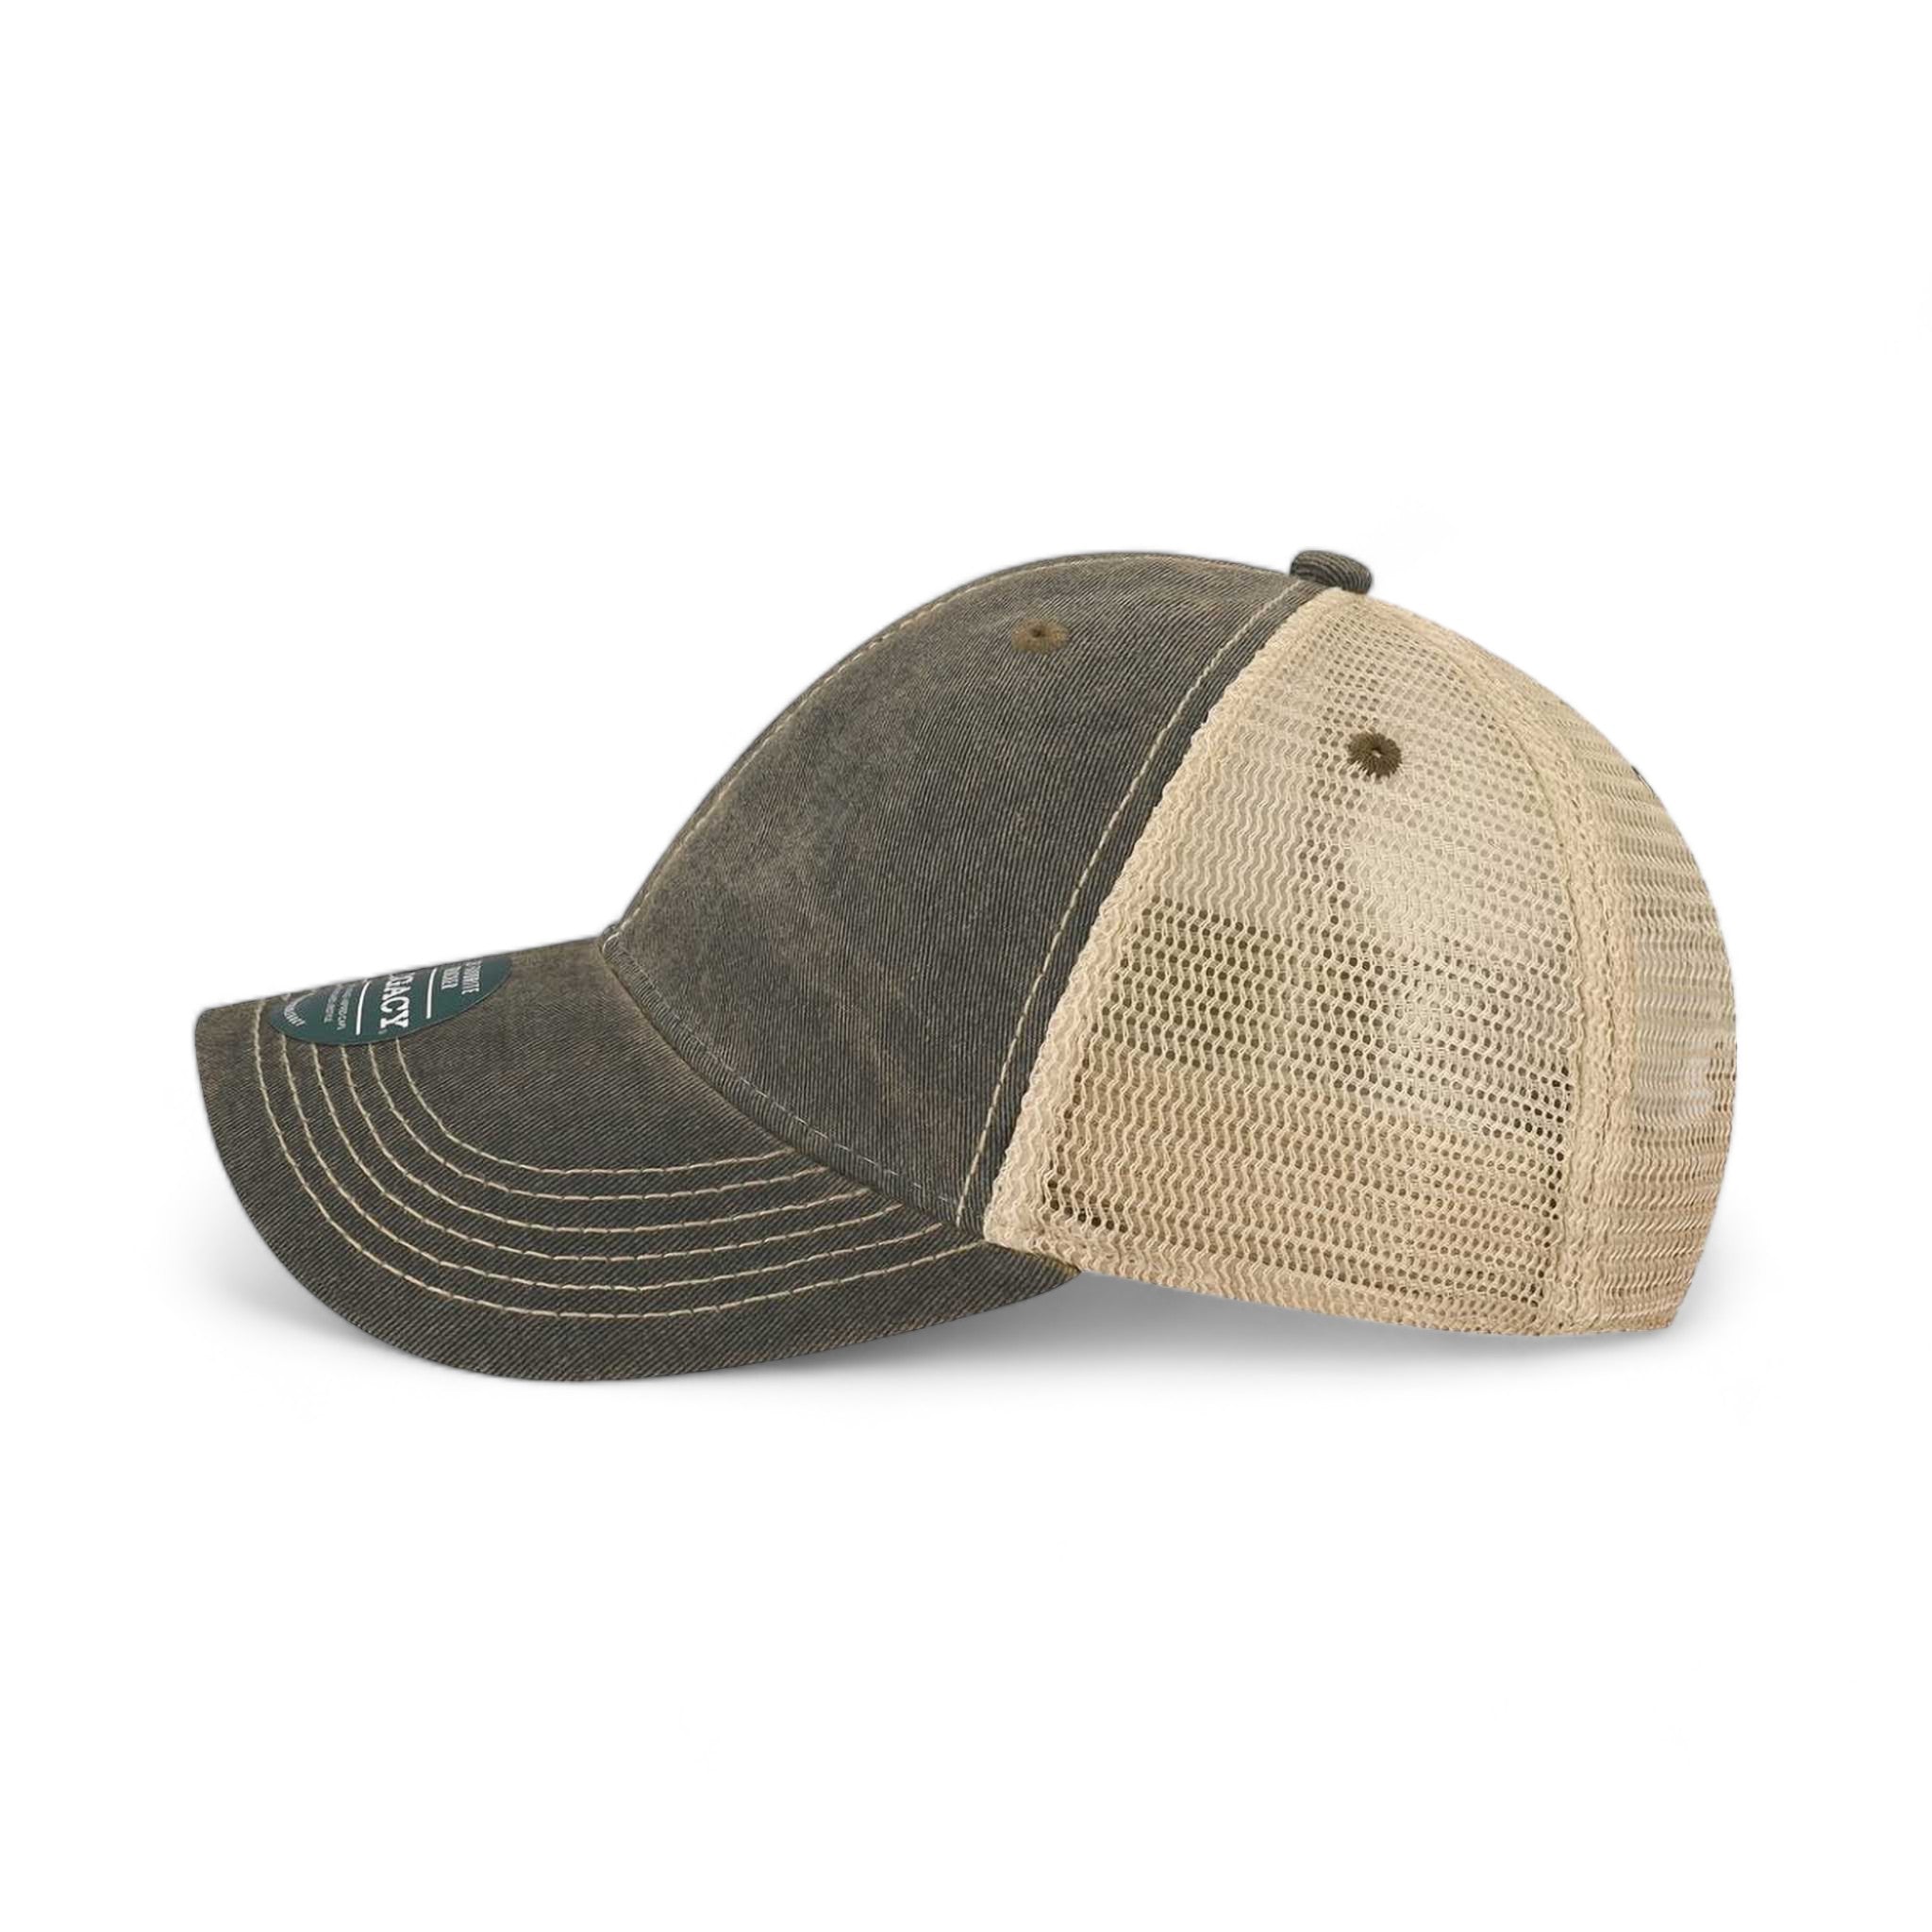 Side view of LEGACY OFAY custom hat in black and khaki